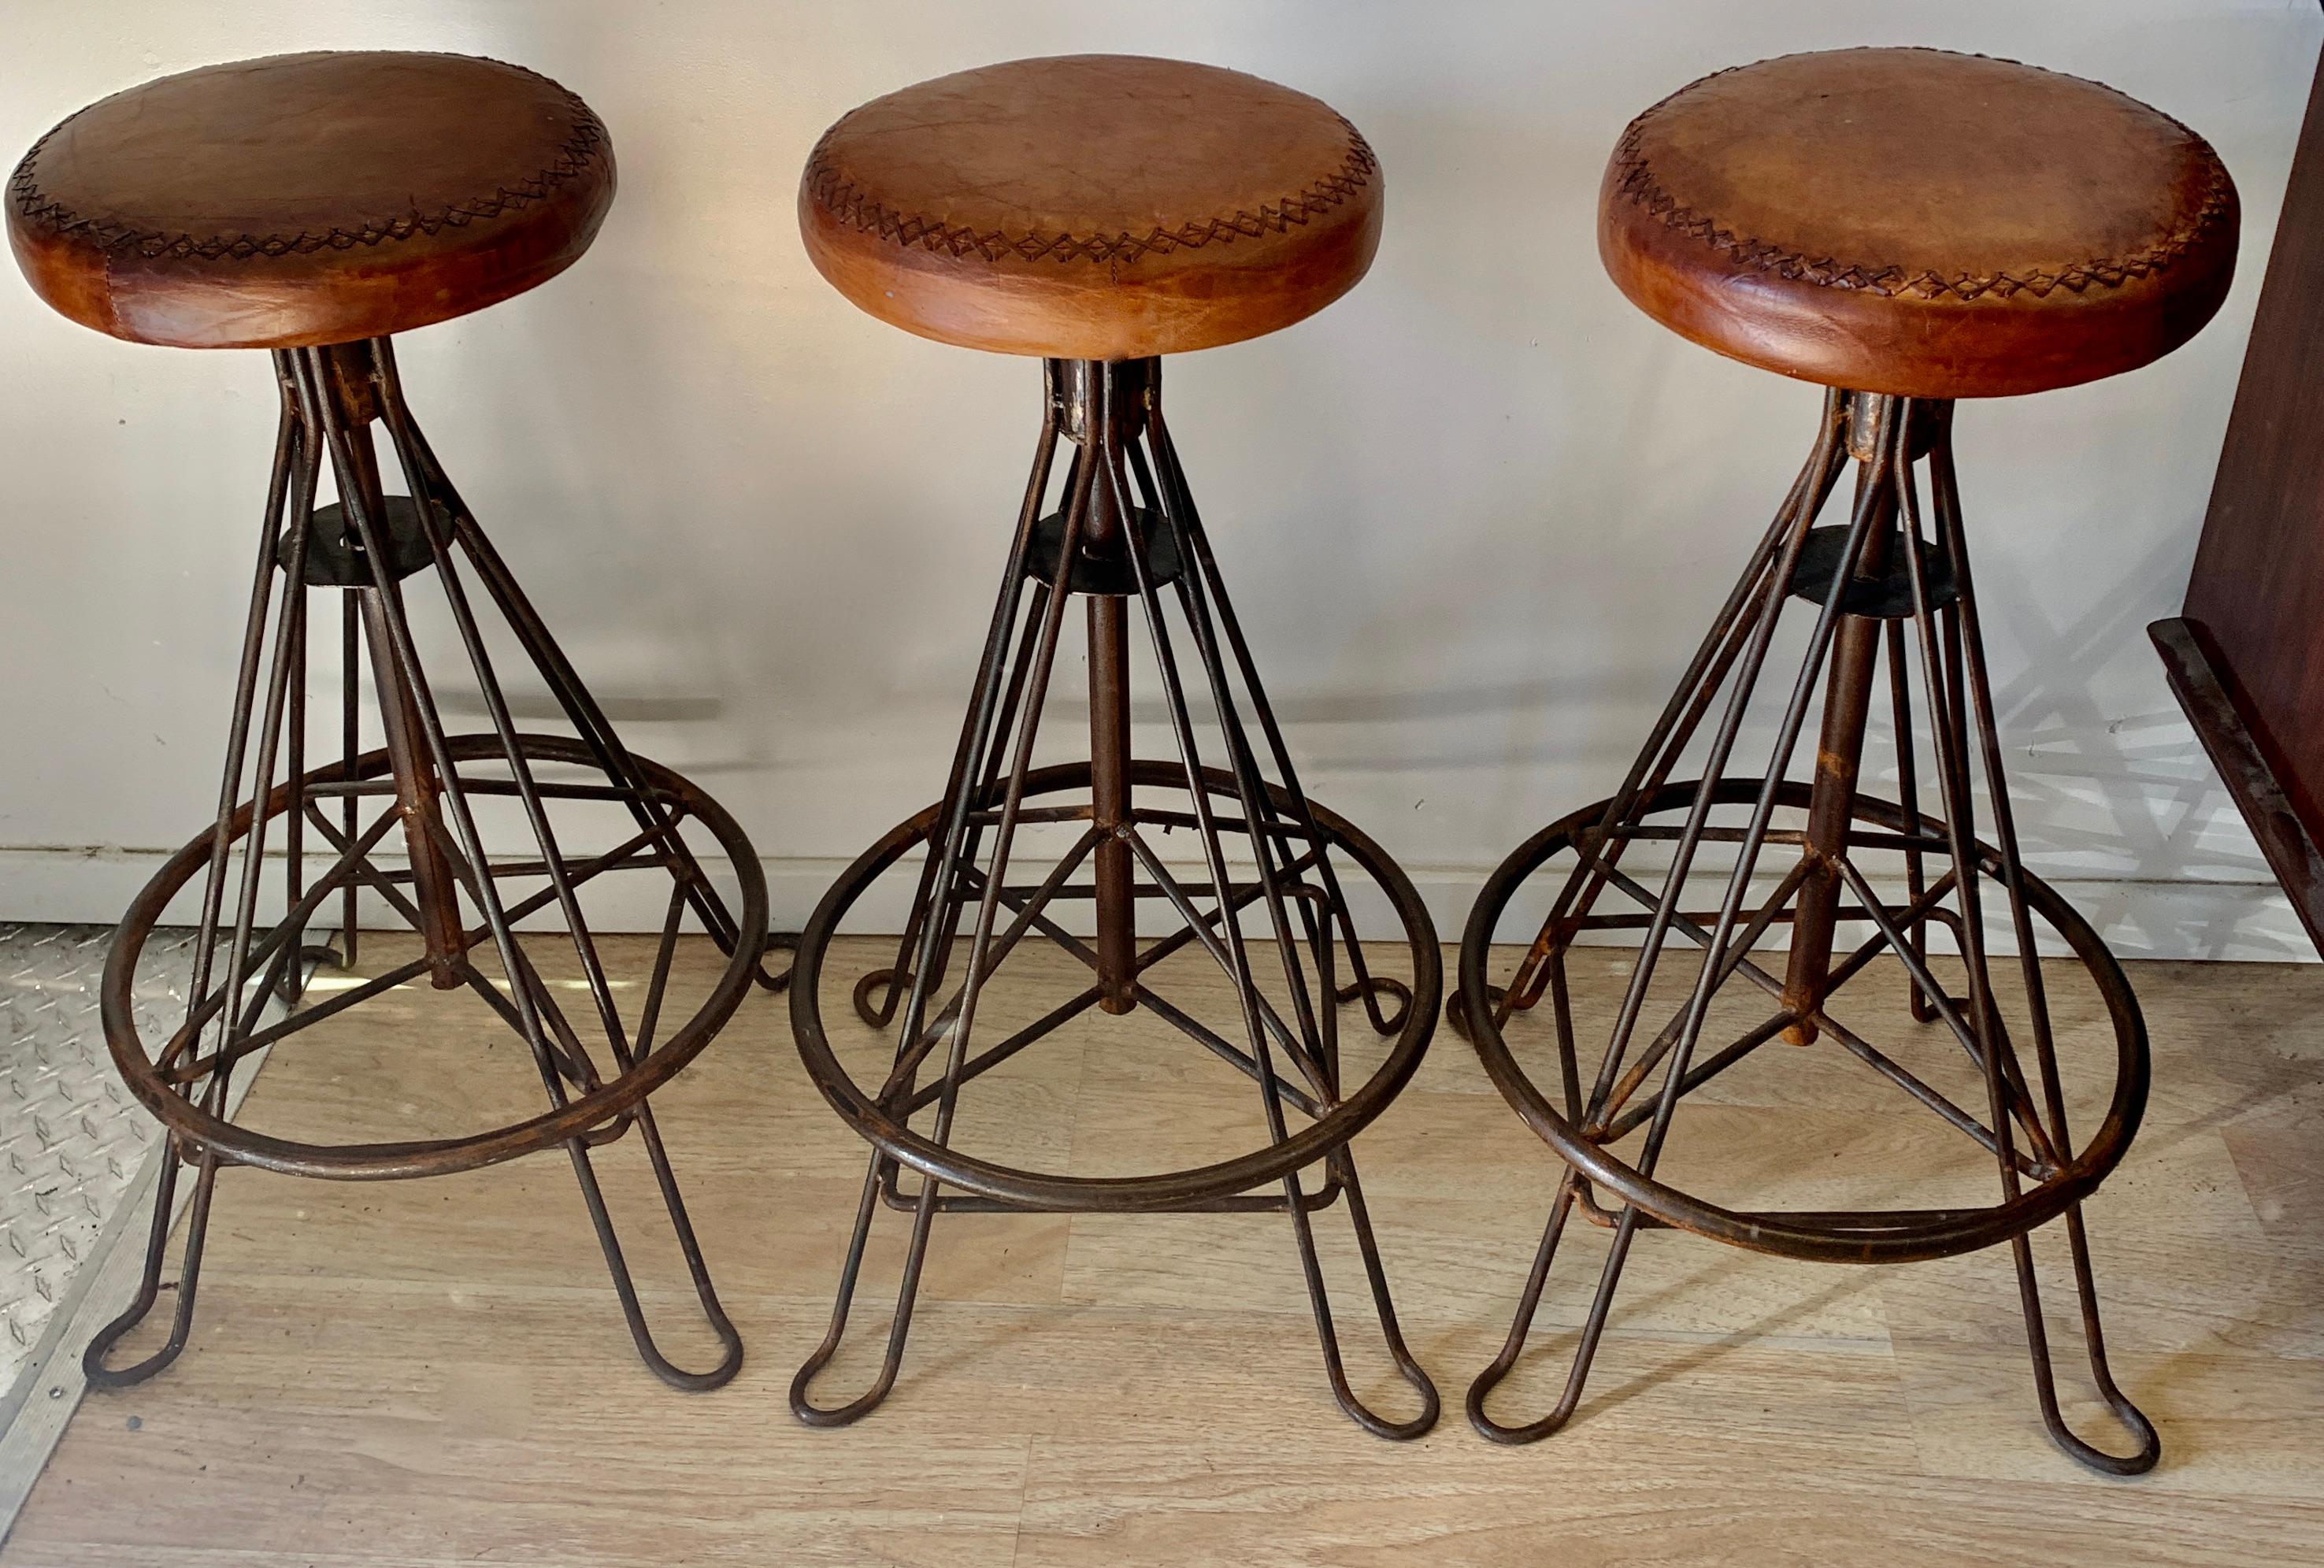 Hand-Crafted Set of Three Wrought Iron and Stitched Leather Bar Stools